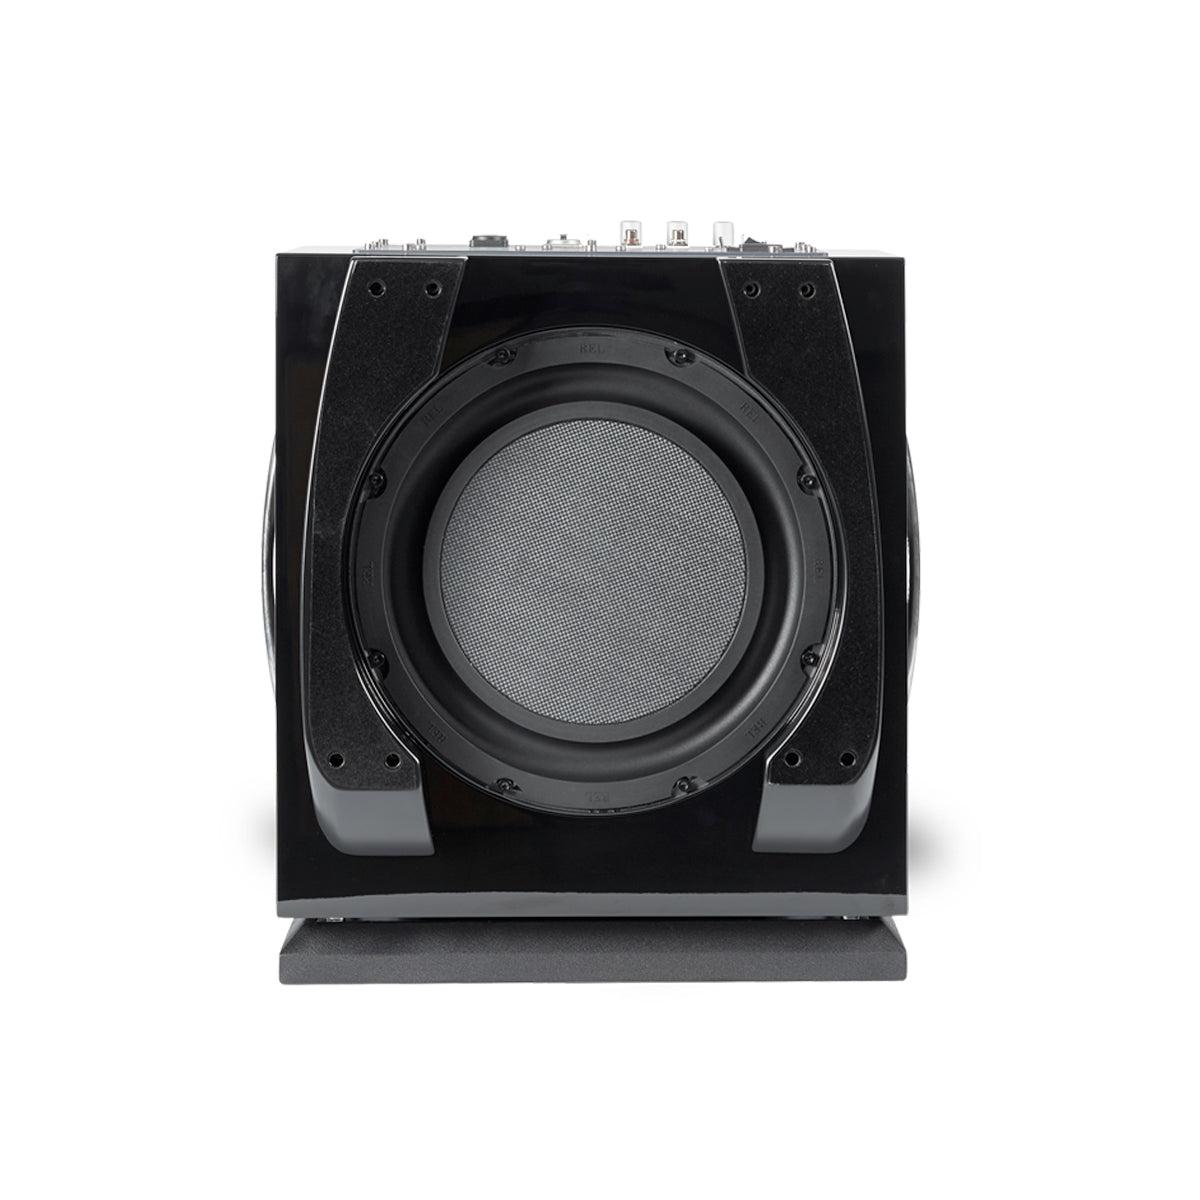 REL Series S510 10" Active Subwoofer - The Audio Experts